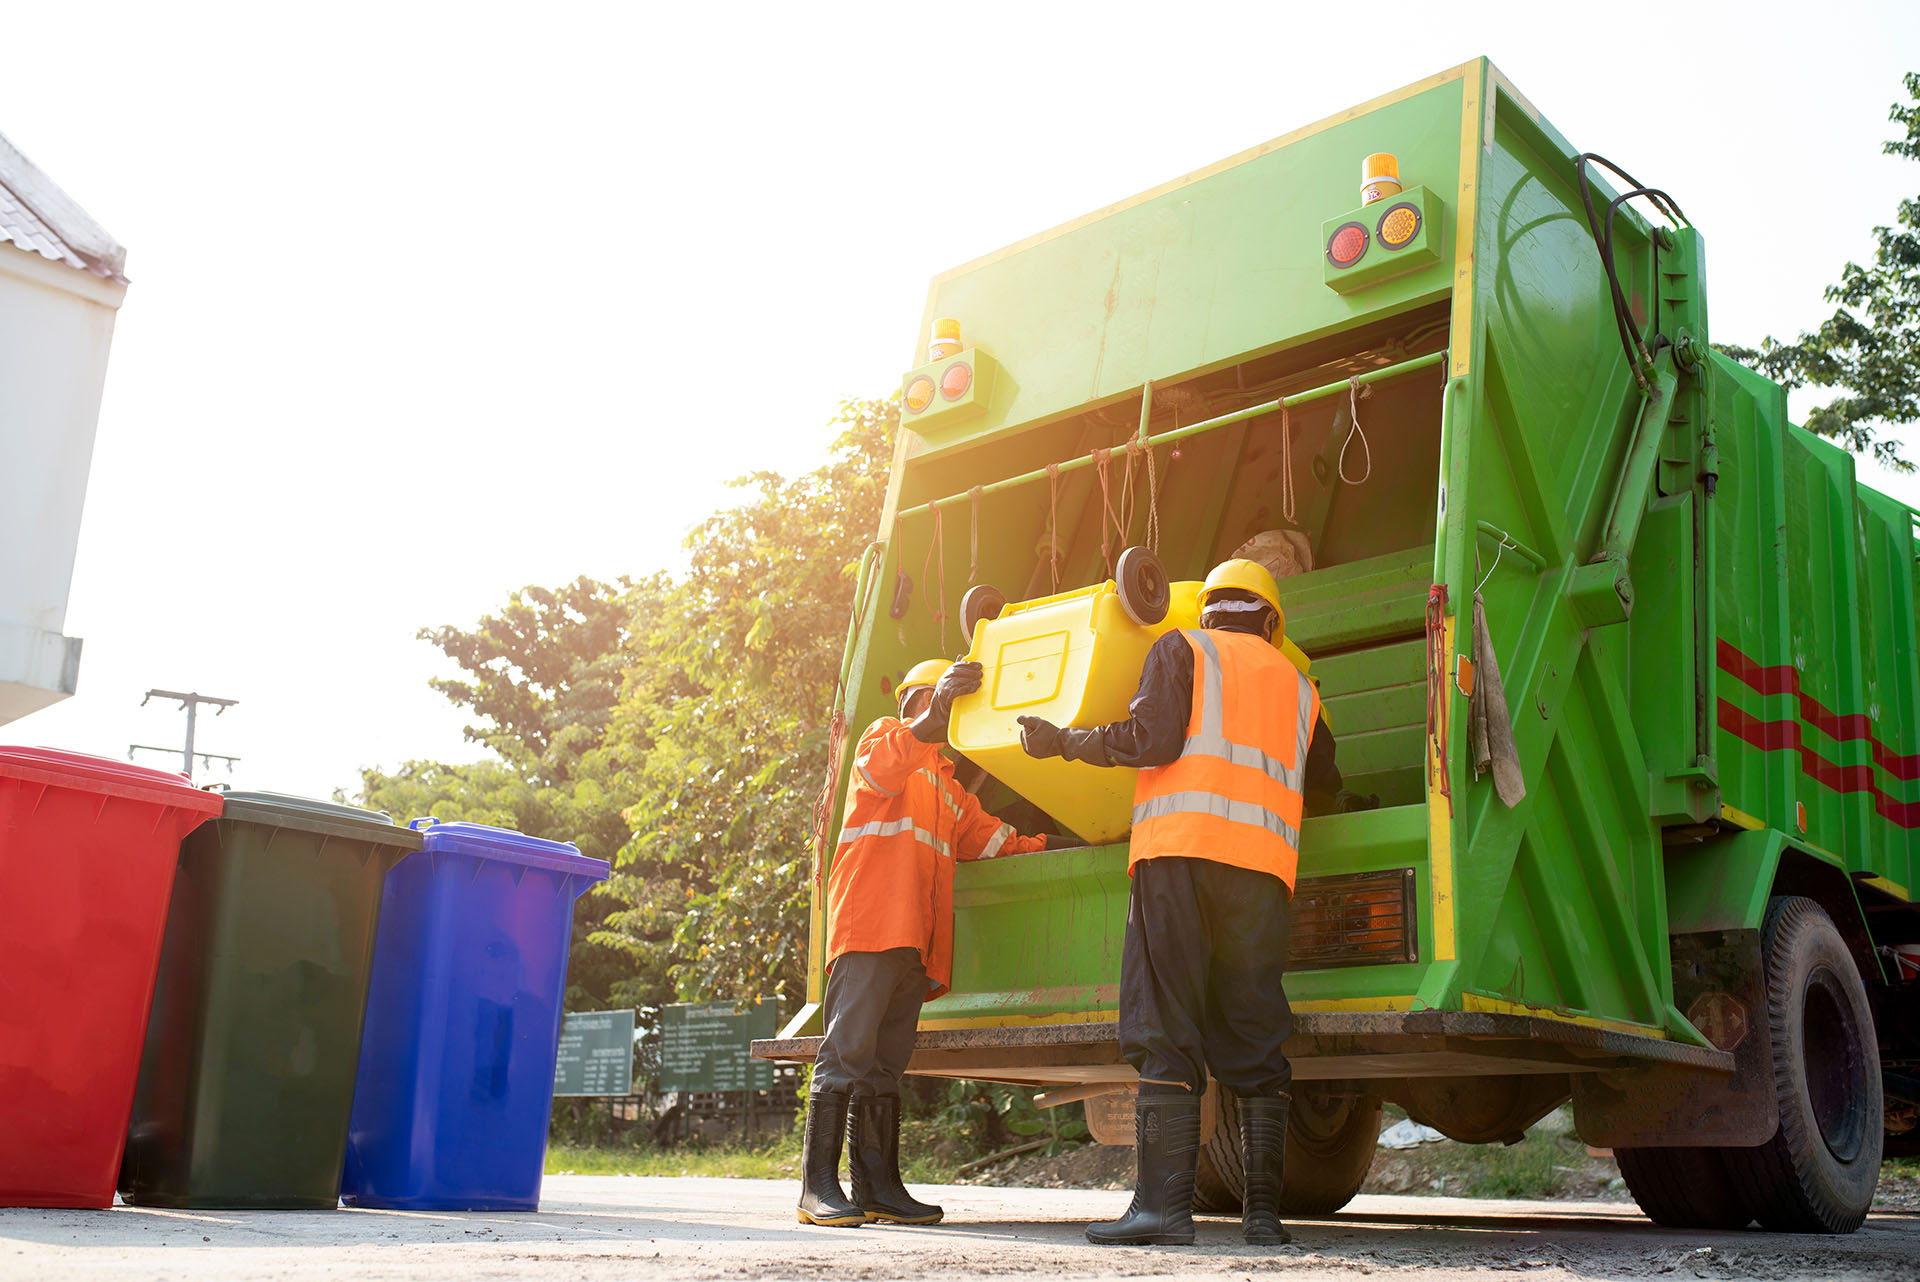 New Waste Reforms - Defra’s Simpler Recycling image shows waste disposal workers emptying recycling bins